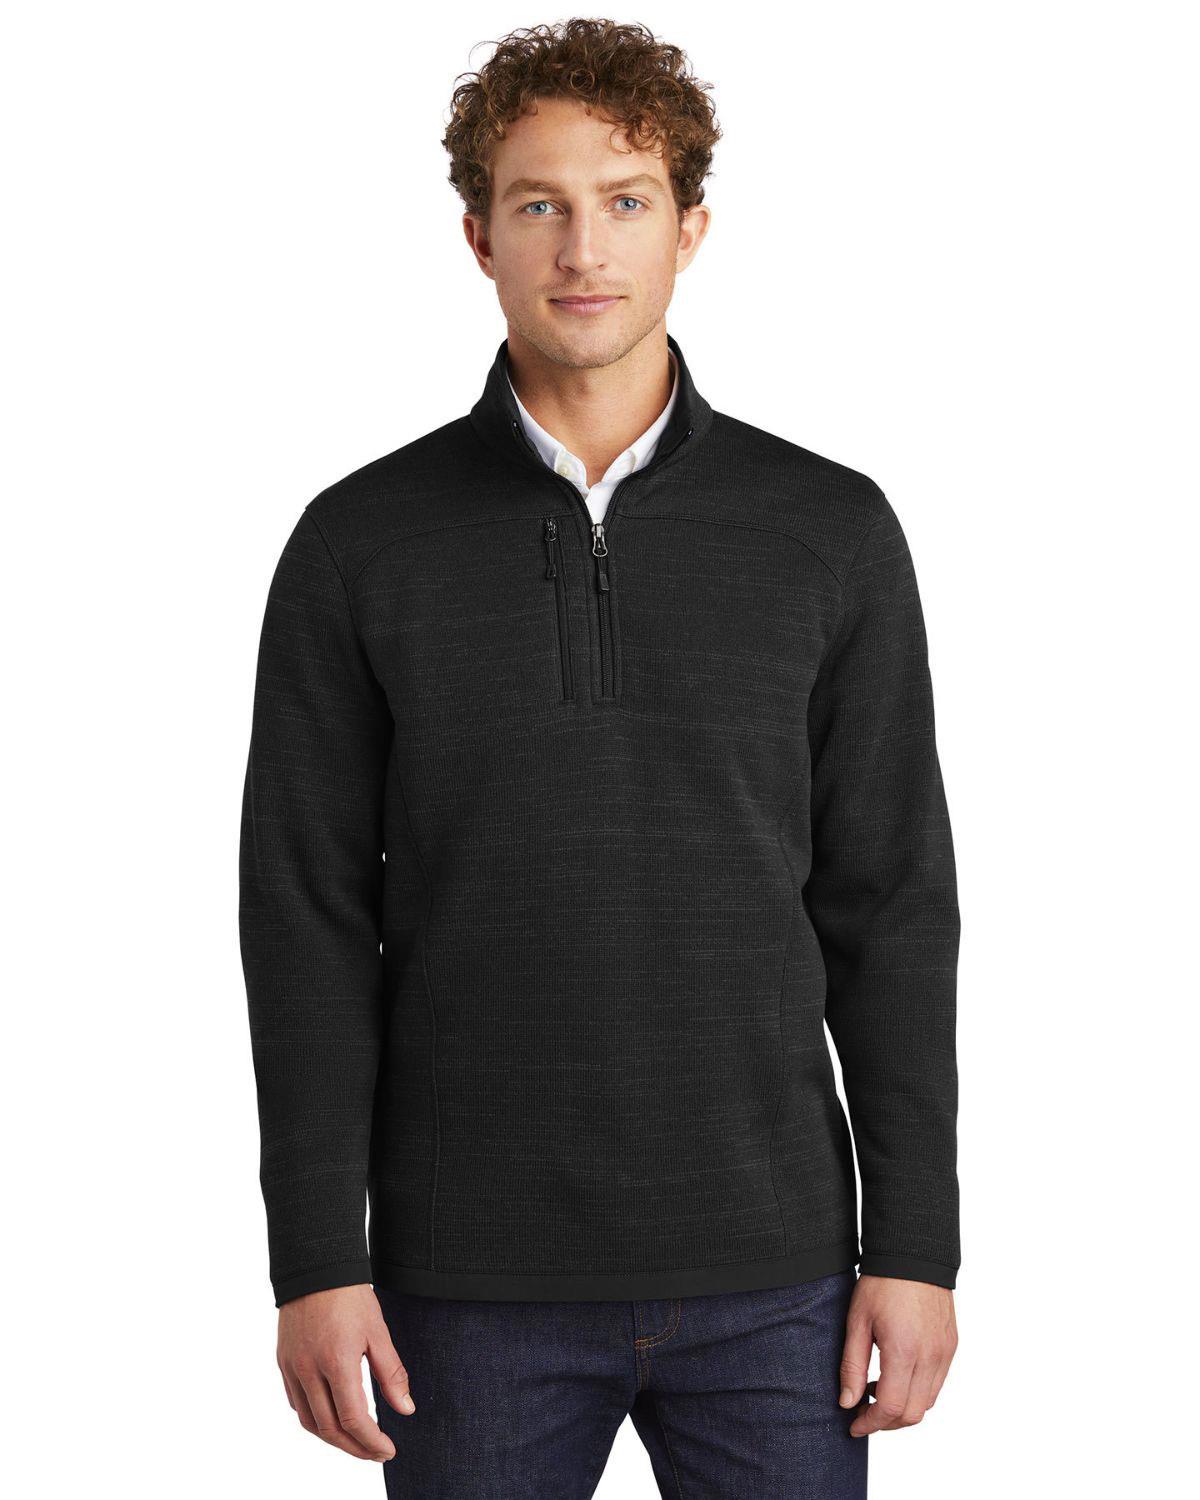 Size Chart for Eddie Bauer EB254 Sweater Fleece 1/4Zip - A2ZClothing.com